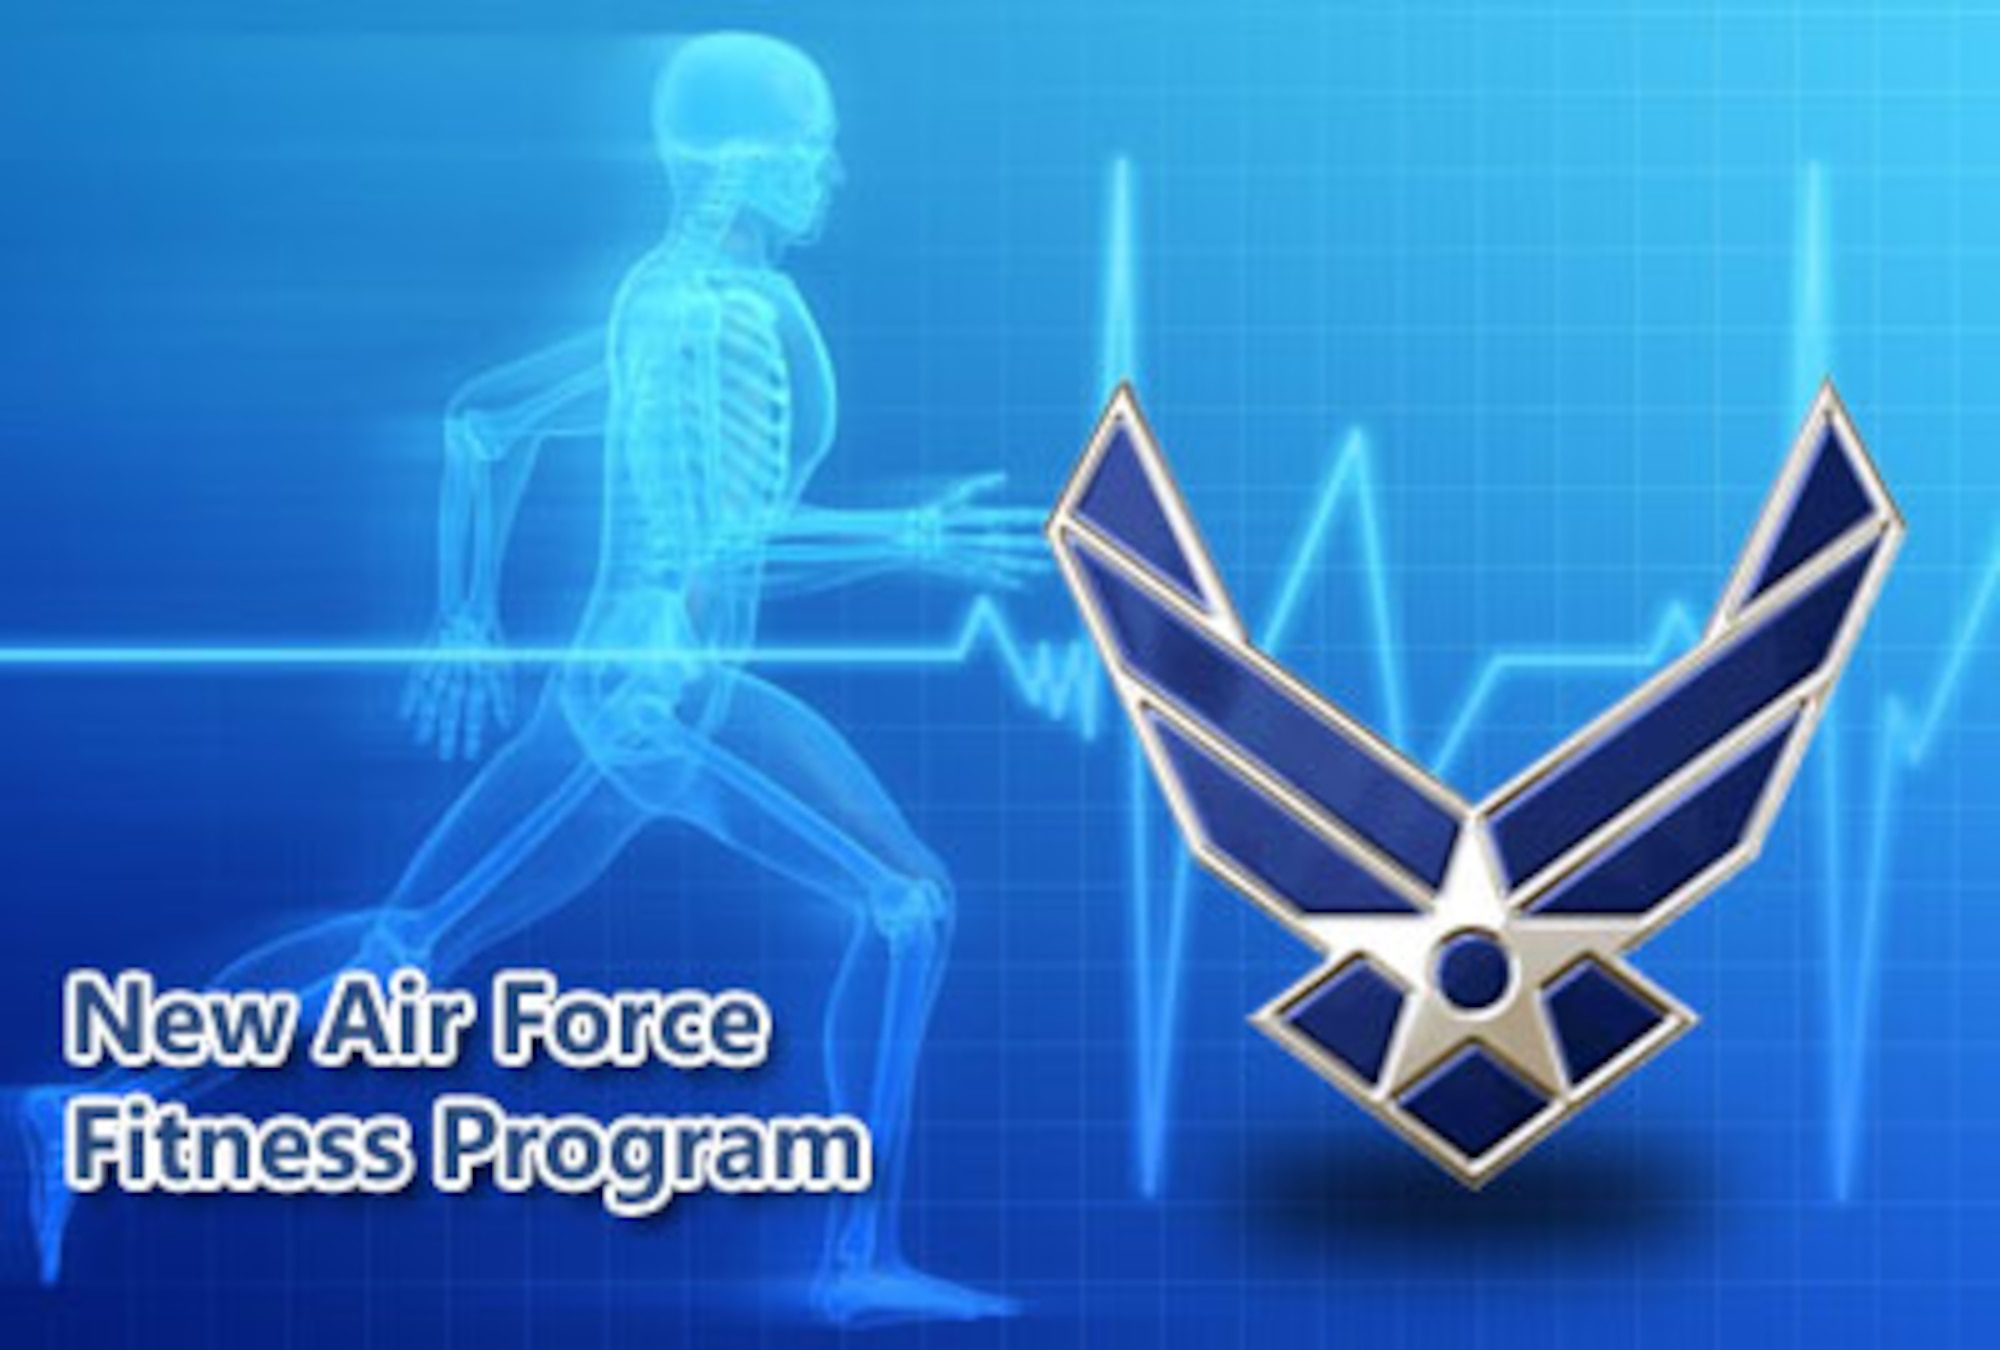 The effective date for the revised fitness program was is now July 1, 2010. Biannual testing under the current fitness standards are still scheduled to begin Jan. 1. The six-month delay was a result of feedback obtained from the field that found implementing the new program in July 2010 would lead to a smoother transition and allow commanders adequate time to establish installation fitness assessment cells.